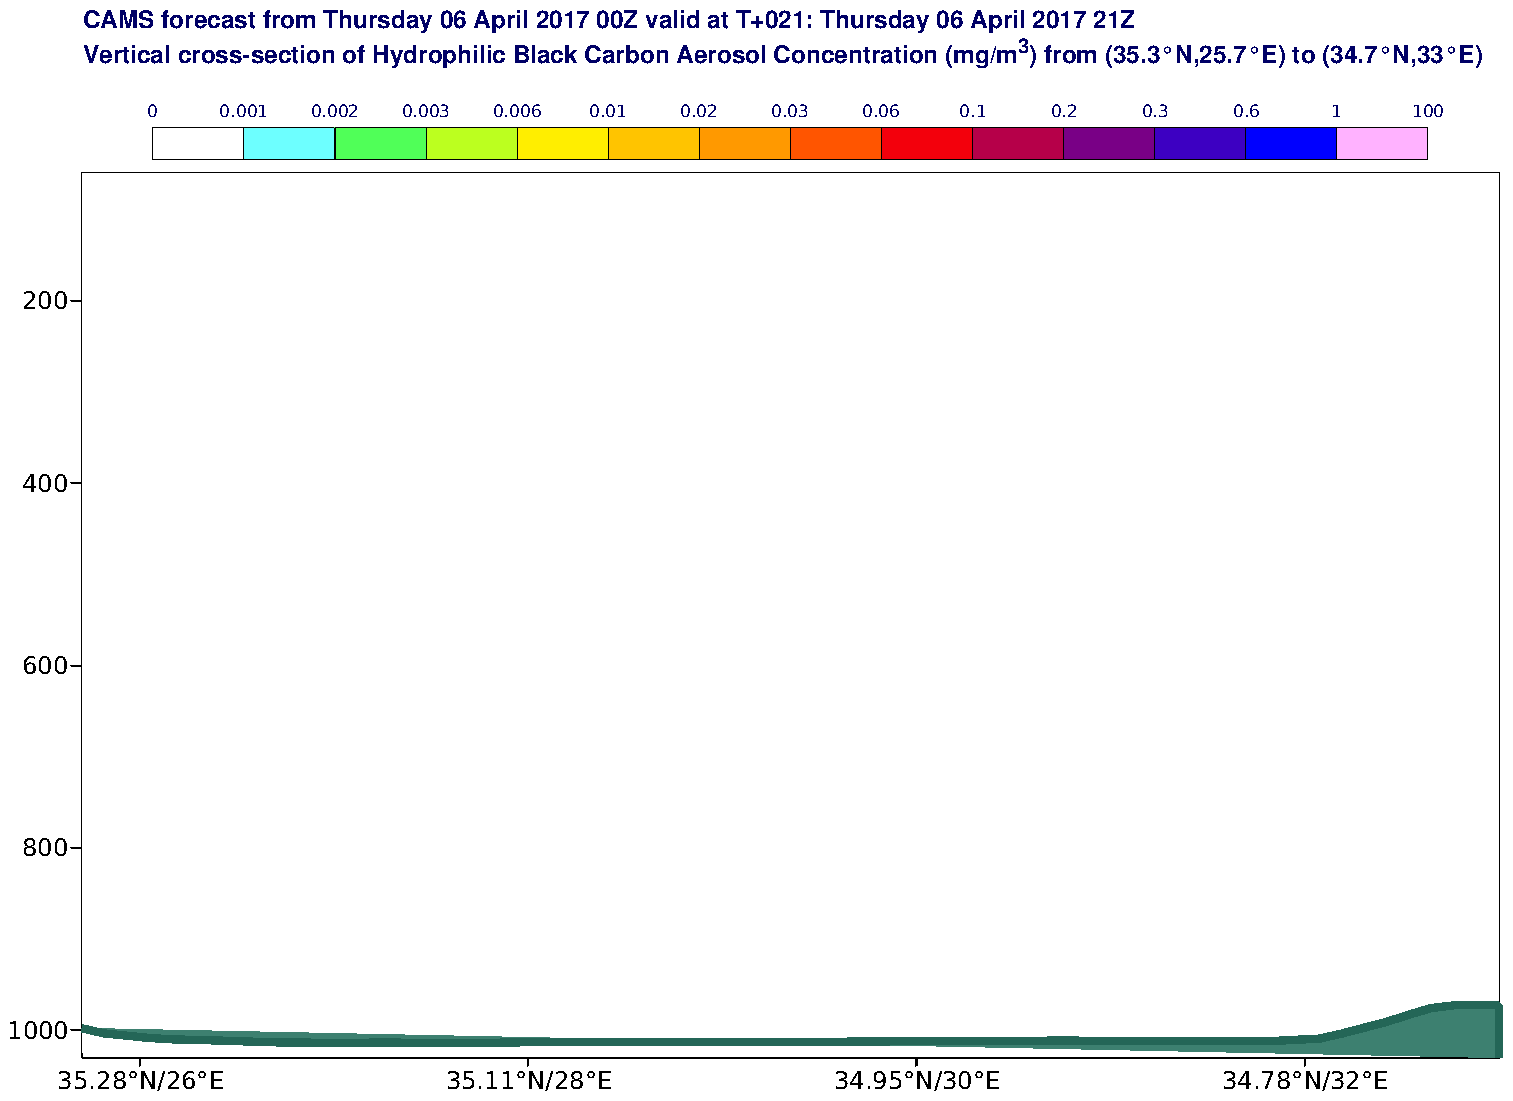 Vertical cross-section of Hydrophilic Black Carbon Aerosol Concentration (mg/m3) valid at T21 - 2017-04-06 21:00